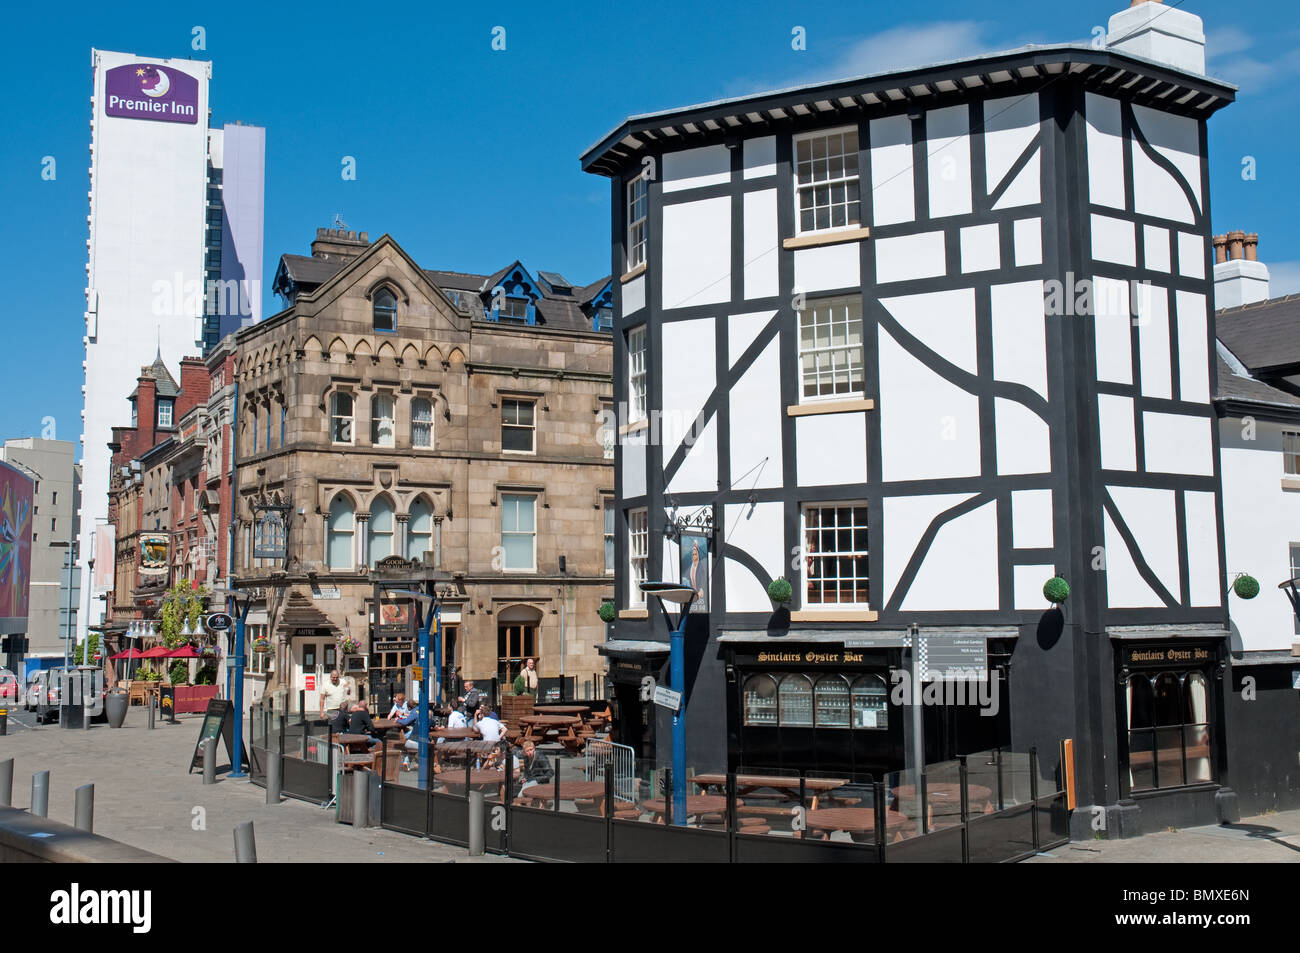 Sinclairs Oyster Bar,Shambles Square,historic bar in Manchester City Centre. Stock Photo